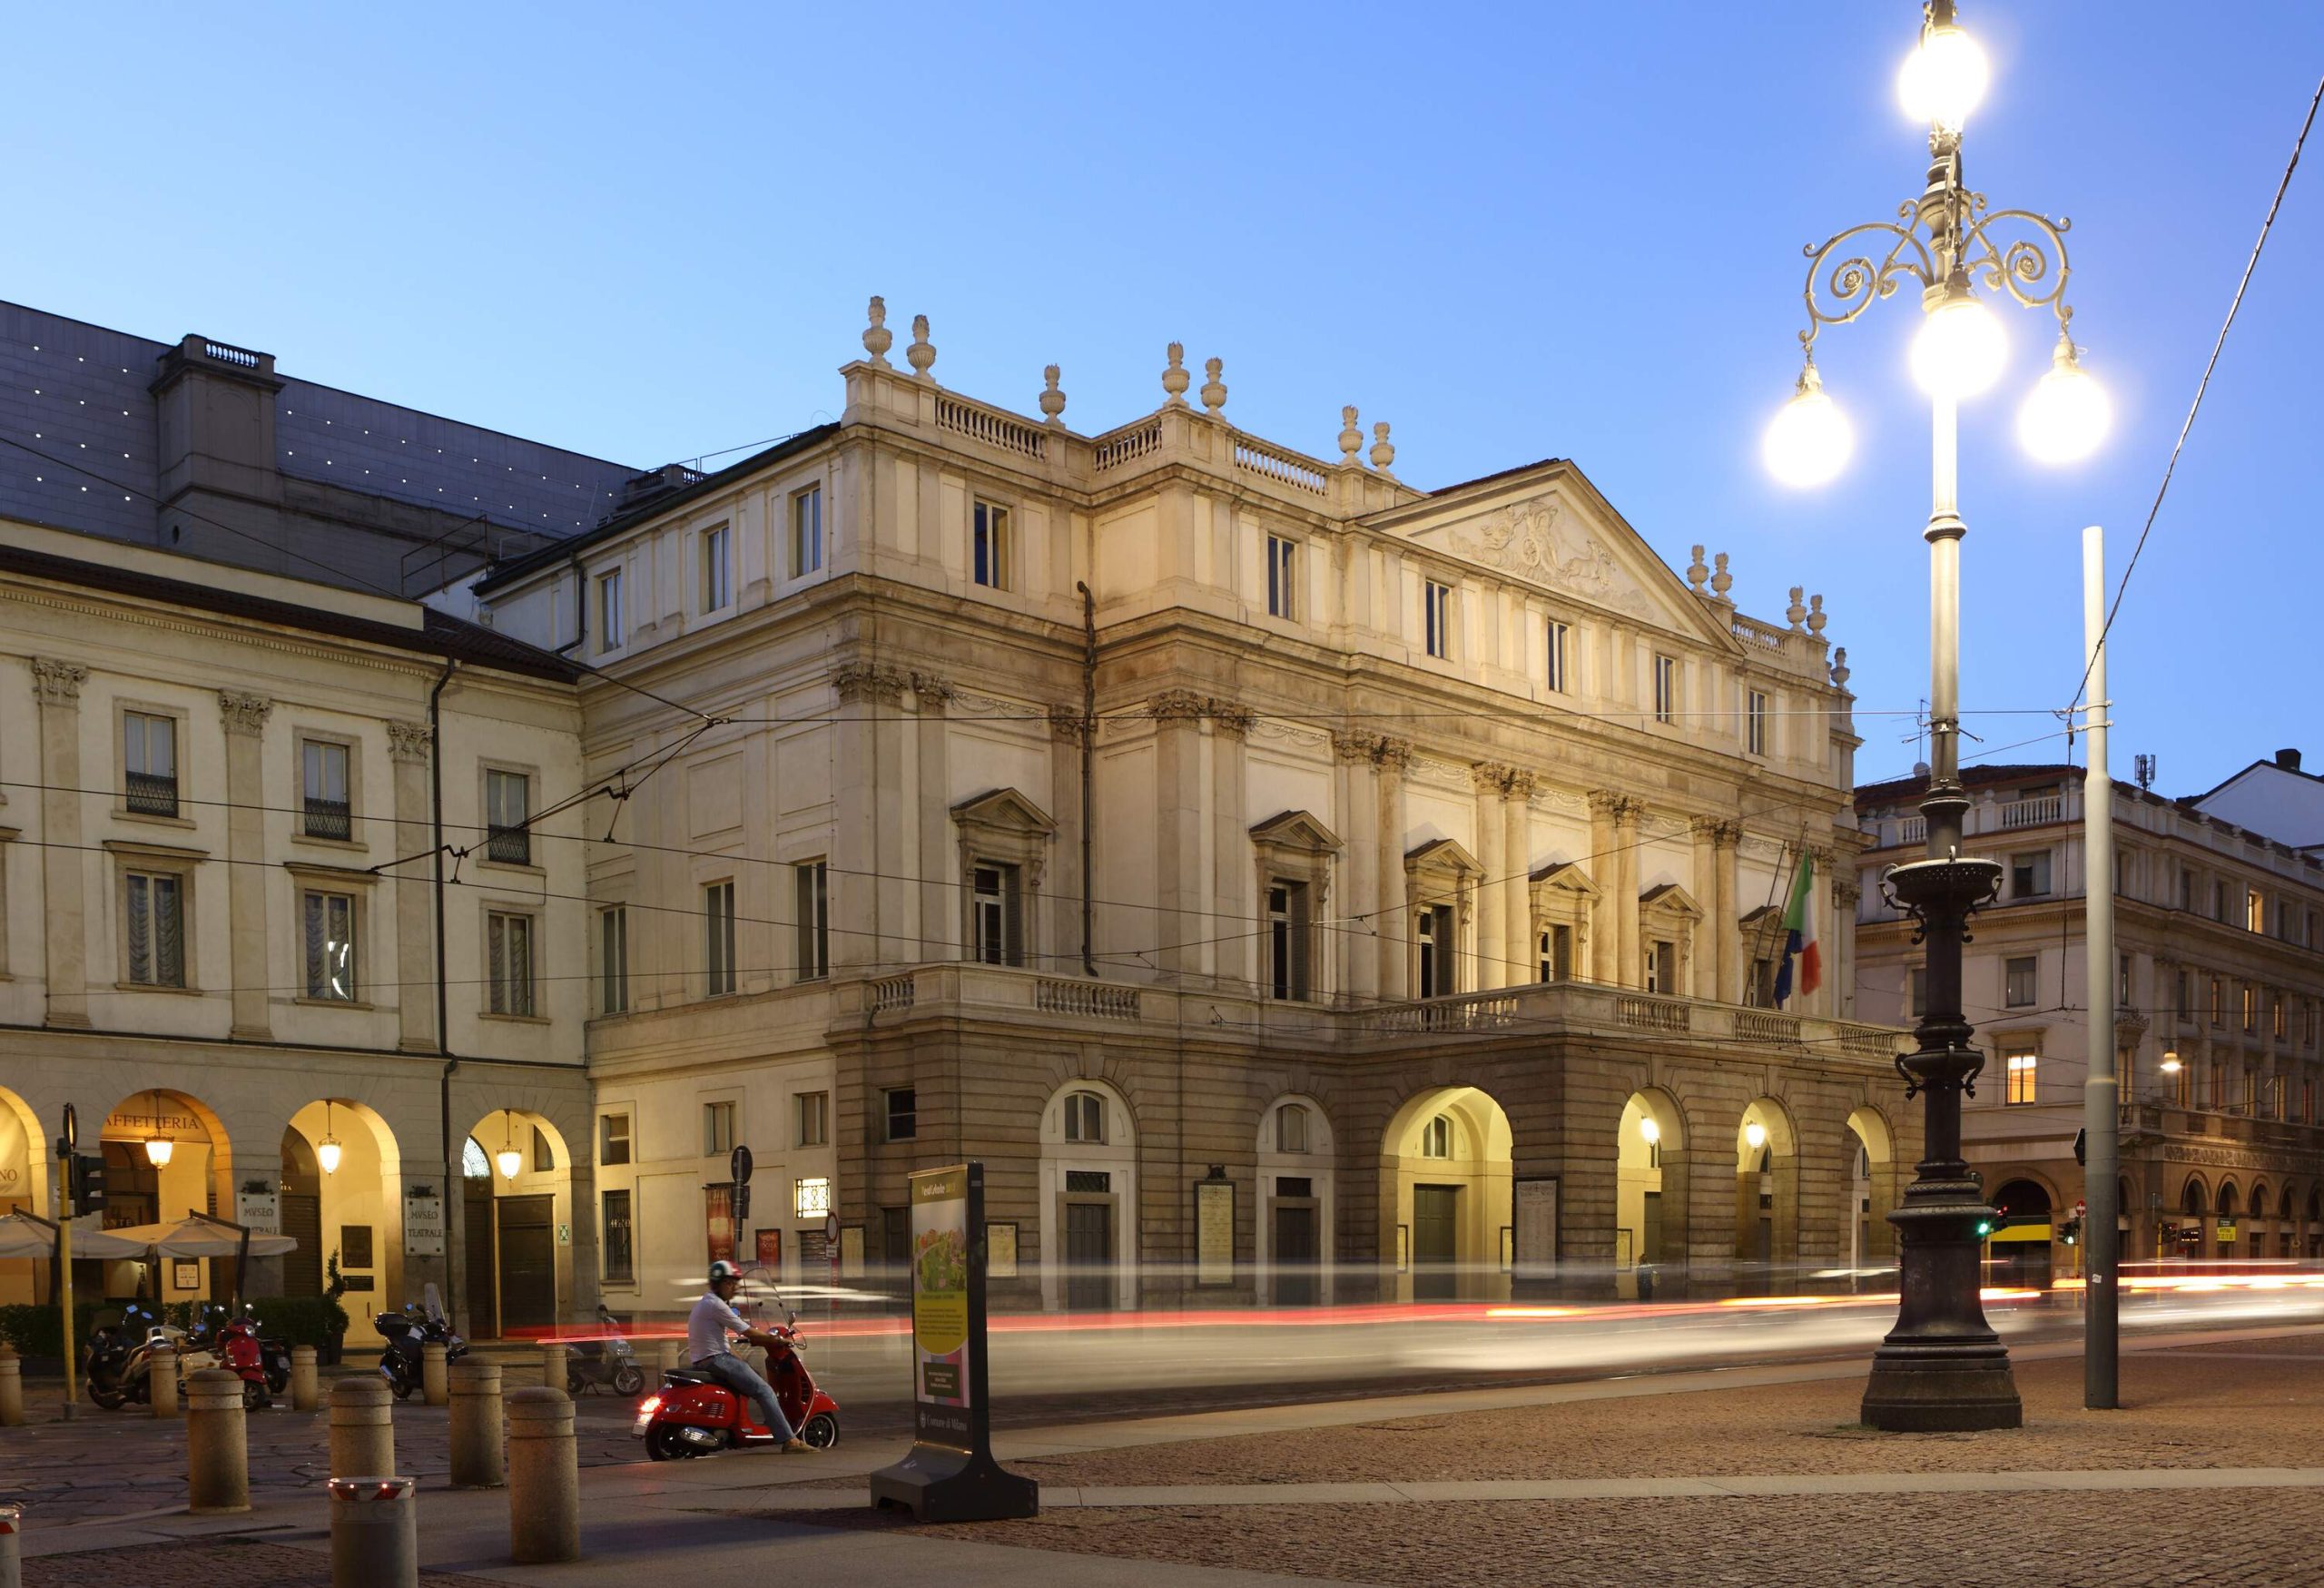 Facade of the famous Teatro alla Scala along a tidy peaceful street with a lighted lamp post.